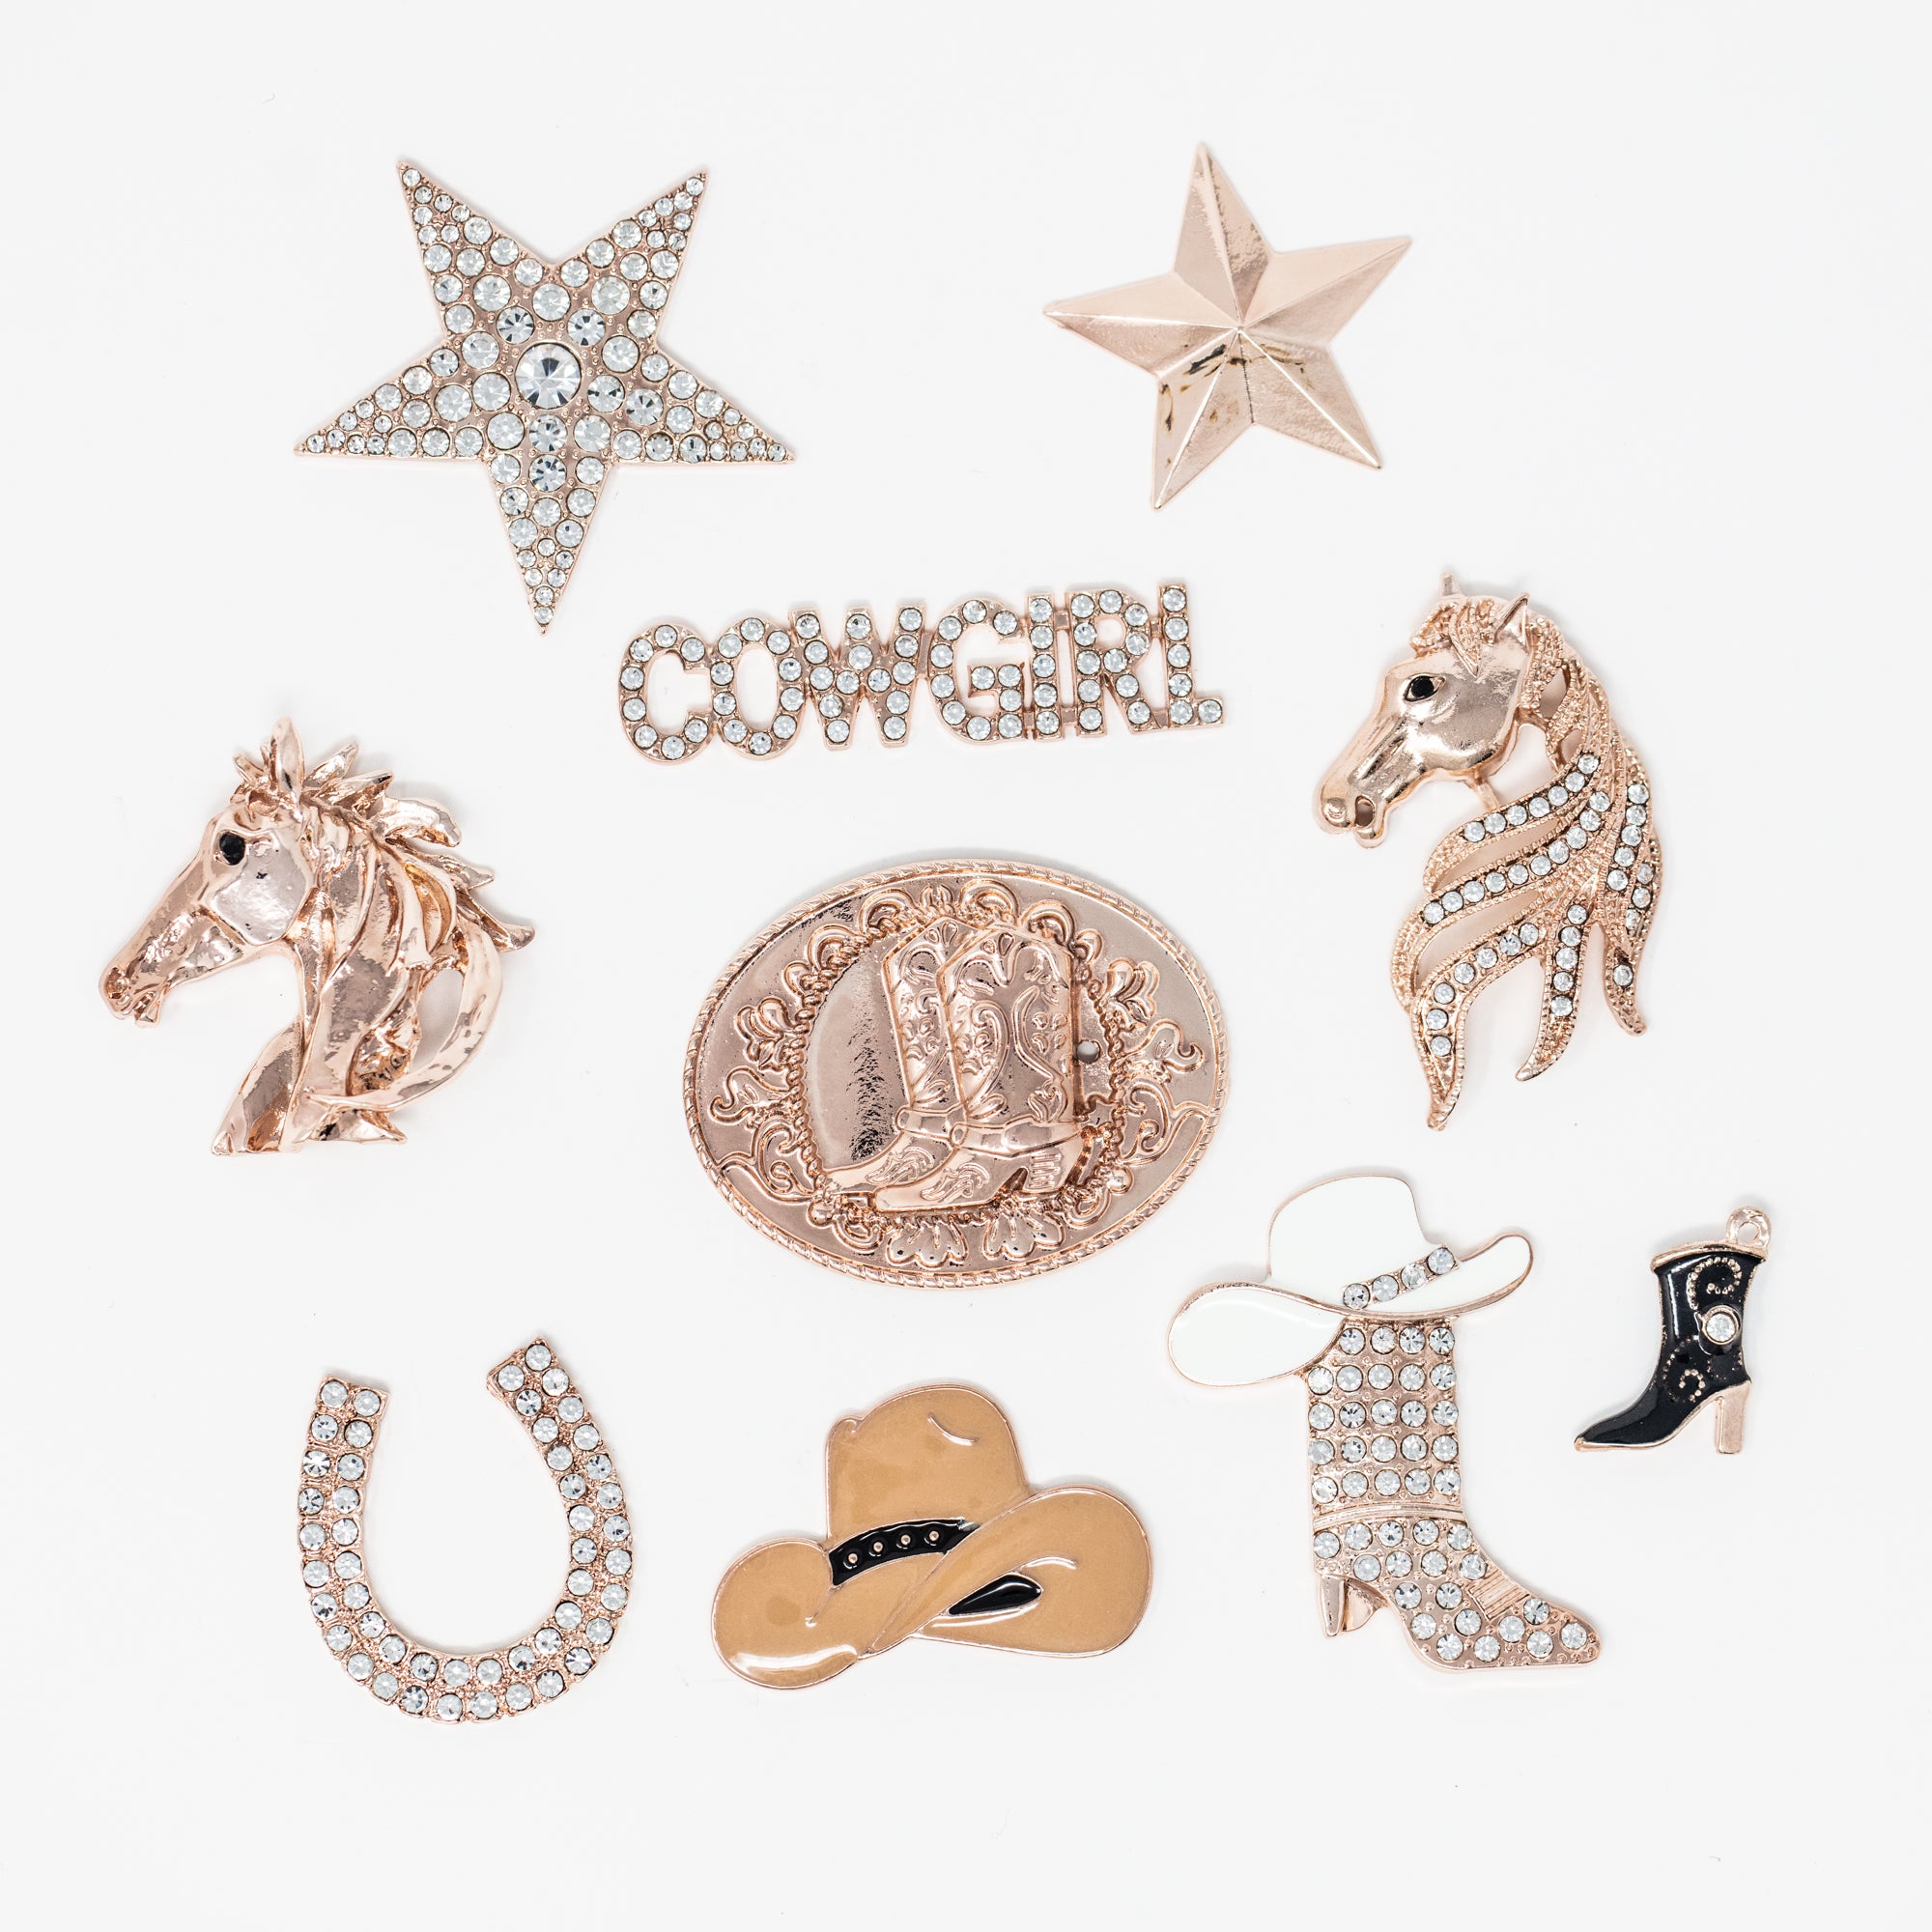 Rose Gold rhinestone cowgirl embellishments for crafts and DIY projects sparkle boots, hats, horses stars